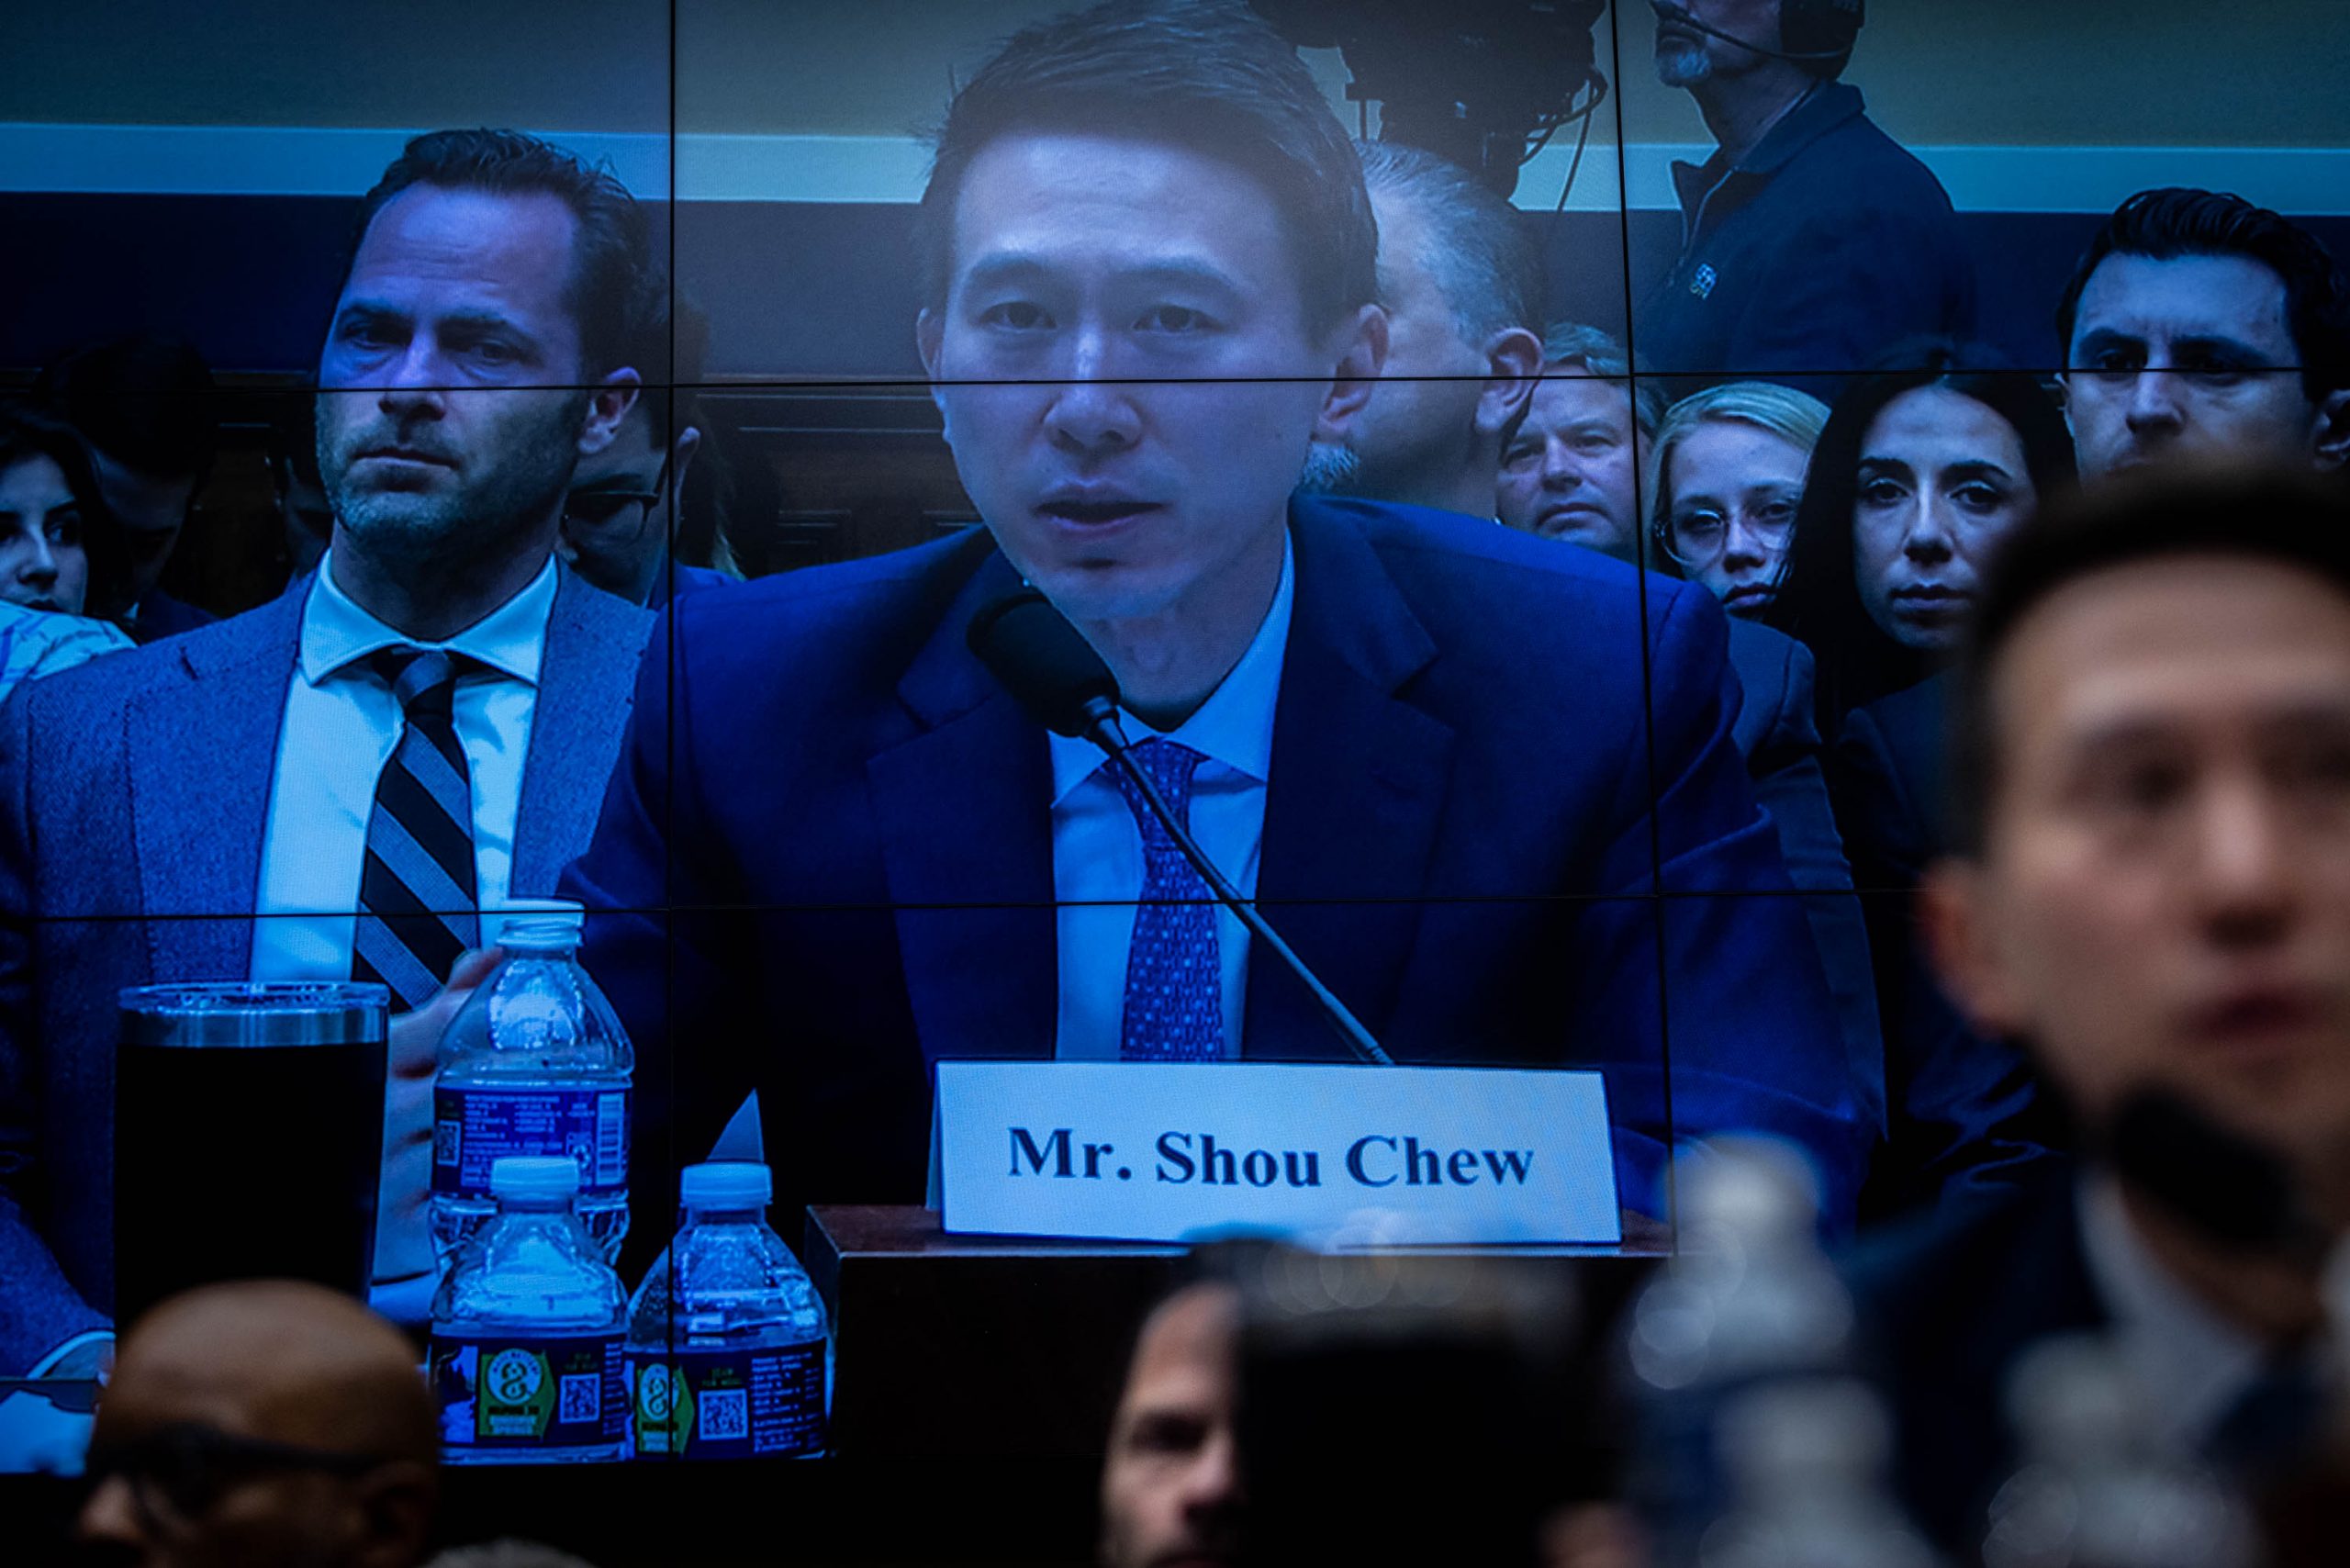 TikTok CEO Shou Zi Chew testifies before the House Energy and Commerce Committee on Capitol Hill on March 23, 2023 in Washington. Shou Zi Chew faced over five hours of questioning by lawmakers about the safety and security of the popular social media app owned by the Chinese company Bytedance.